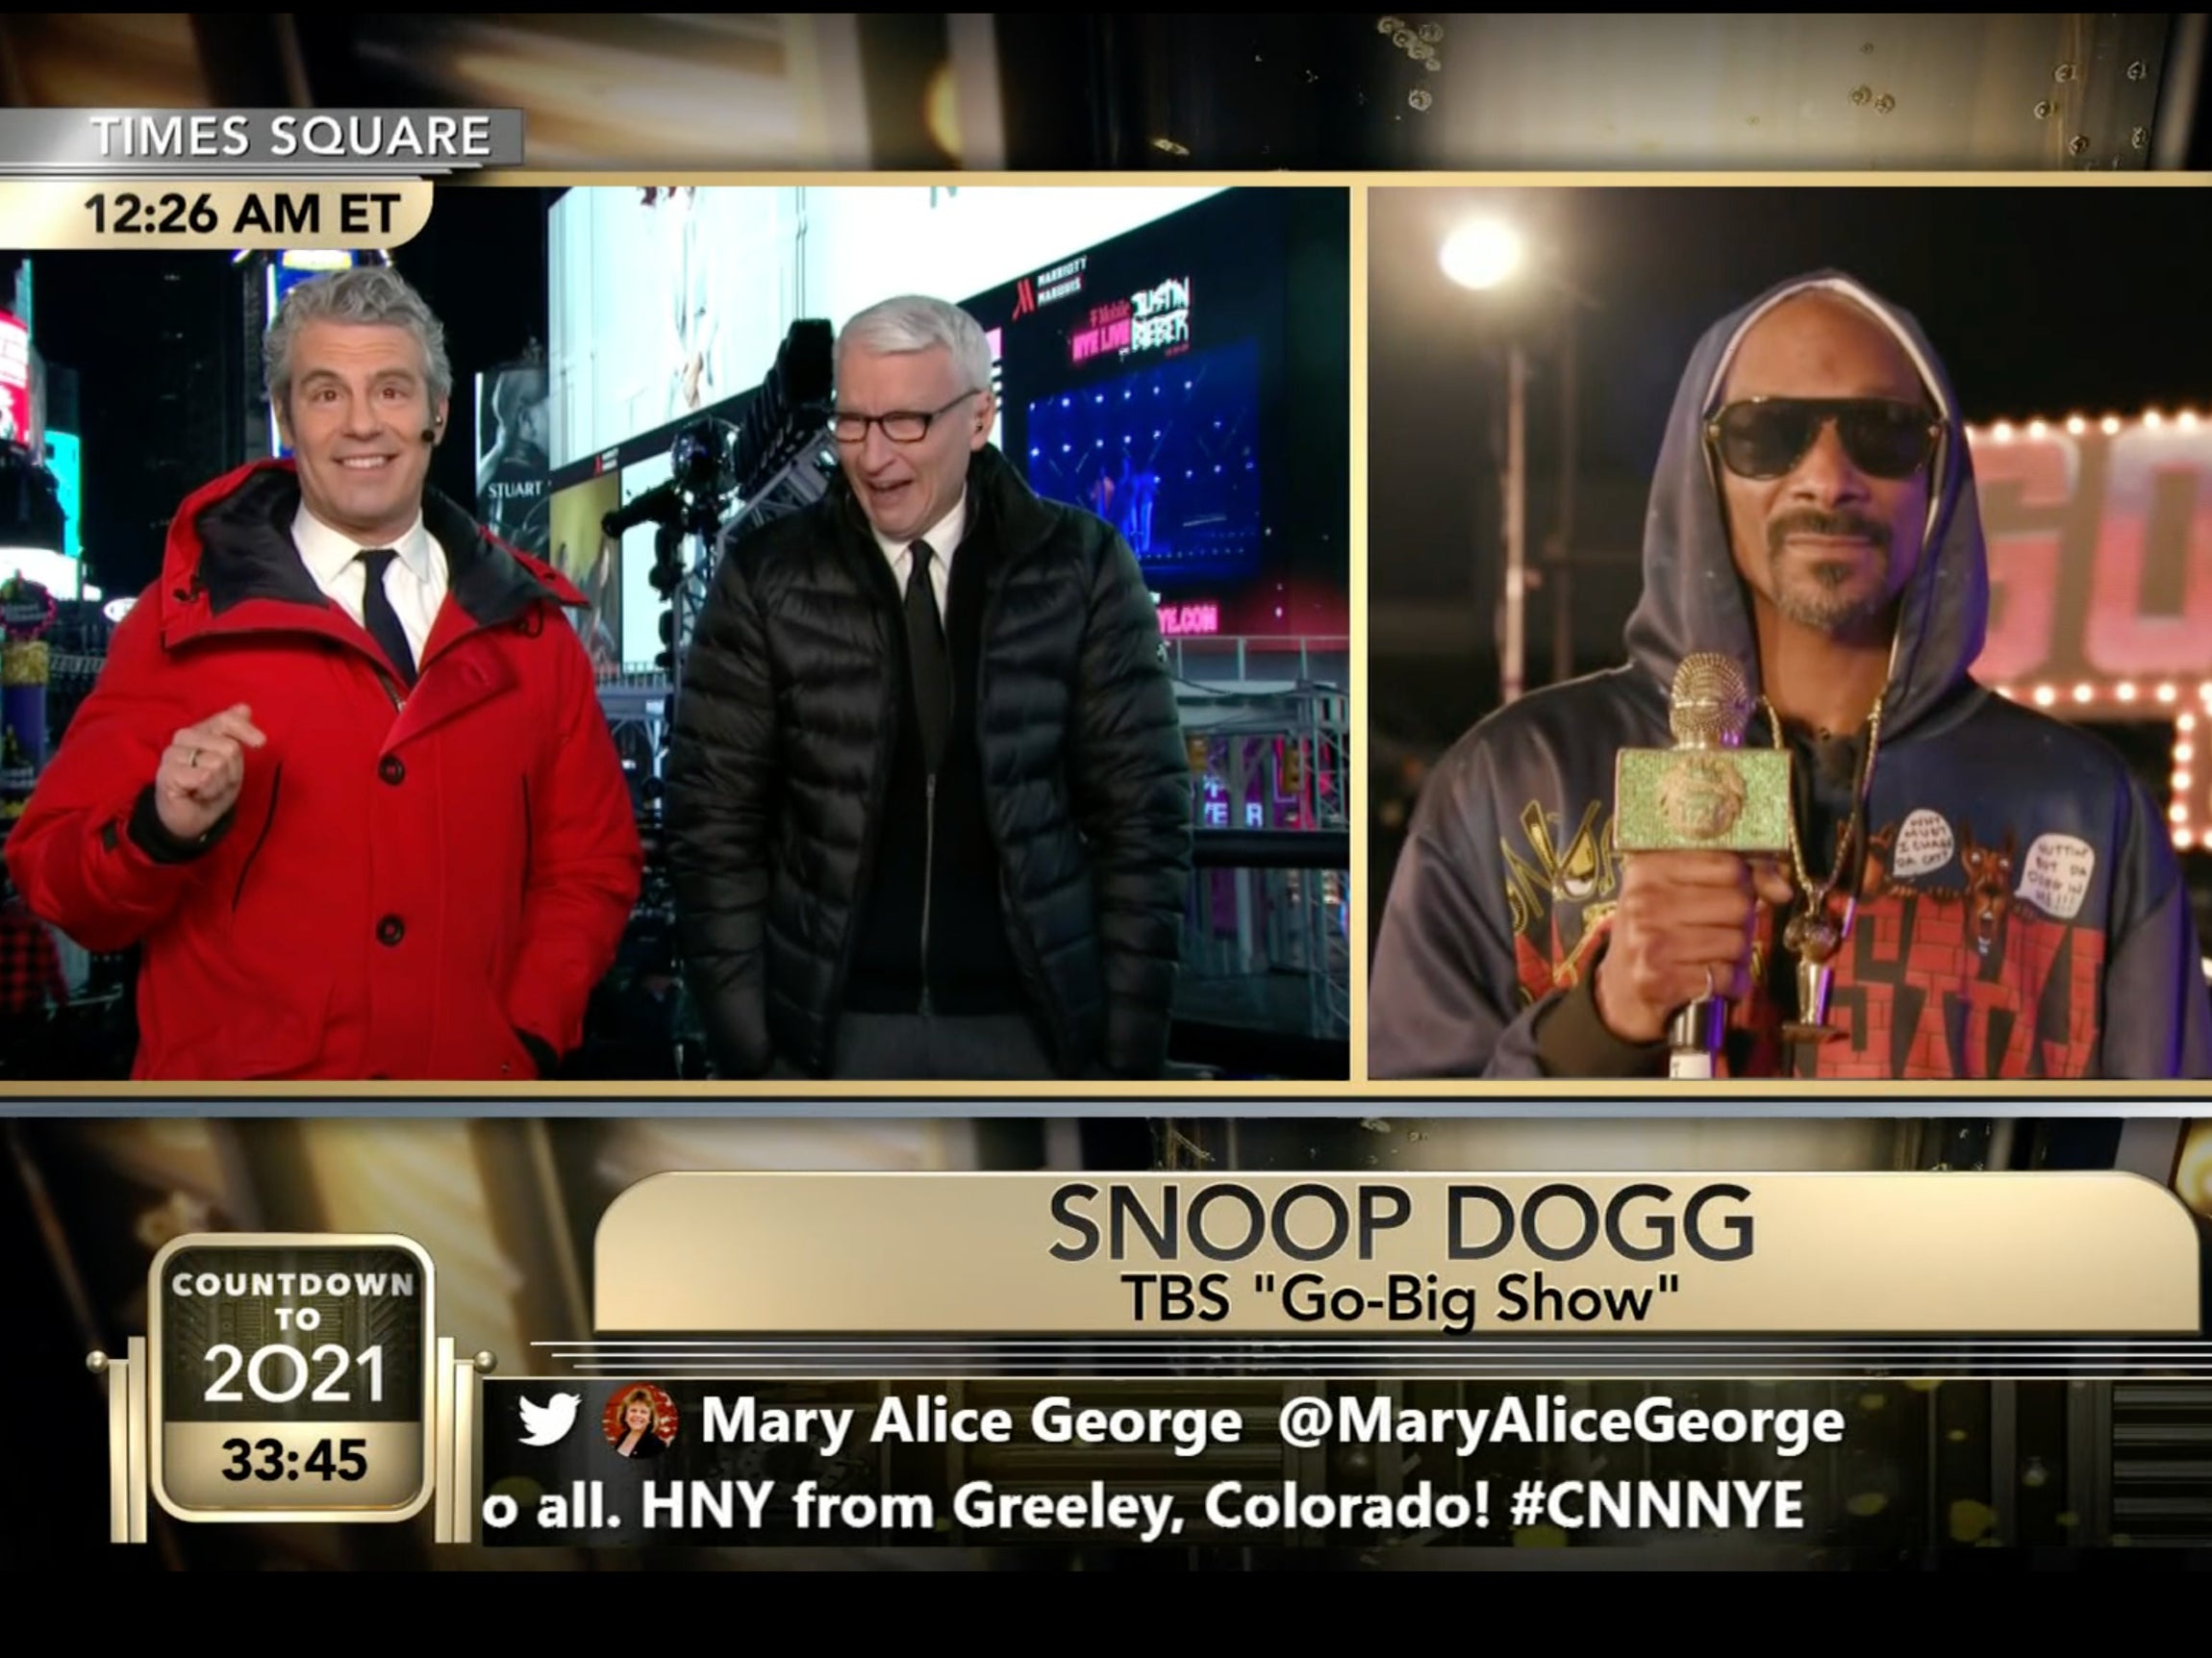 Snoop Dogg has Anderson Cooper in his stride as he plays “Did You Go High There?”  with Andy Cohen